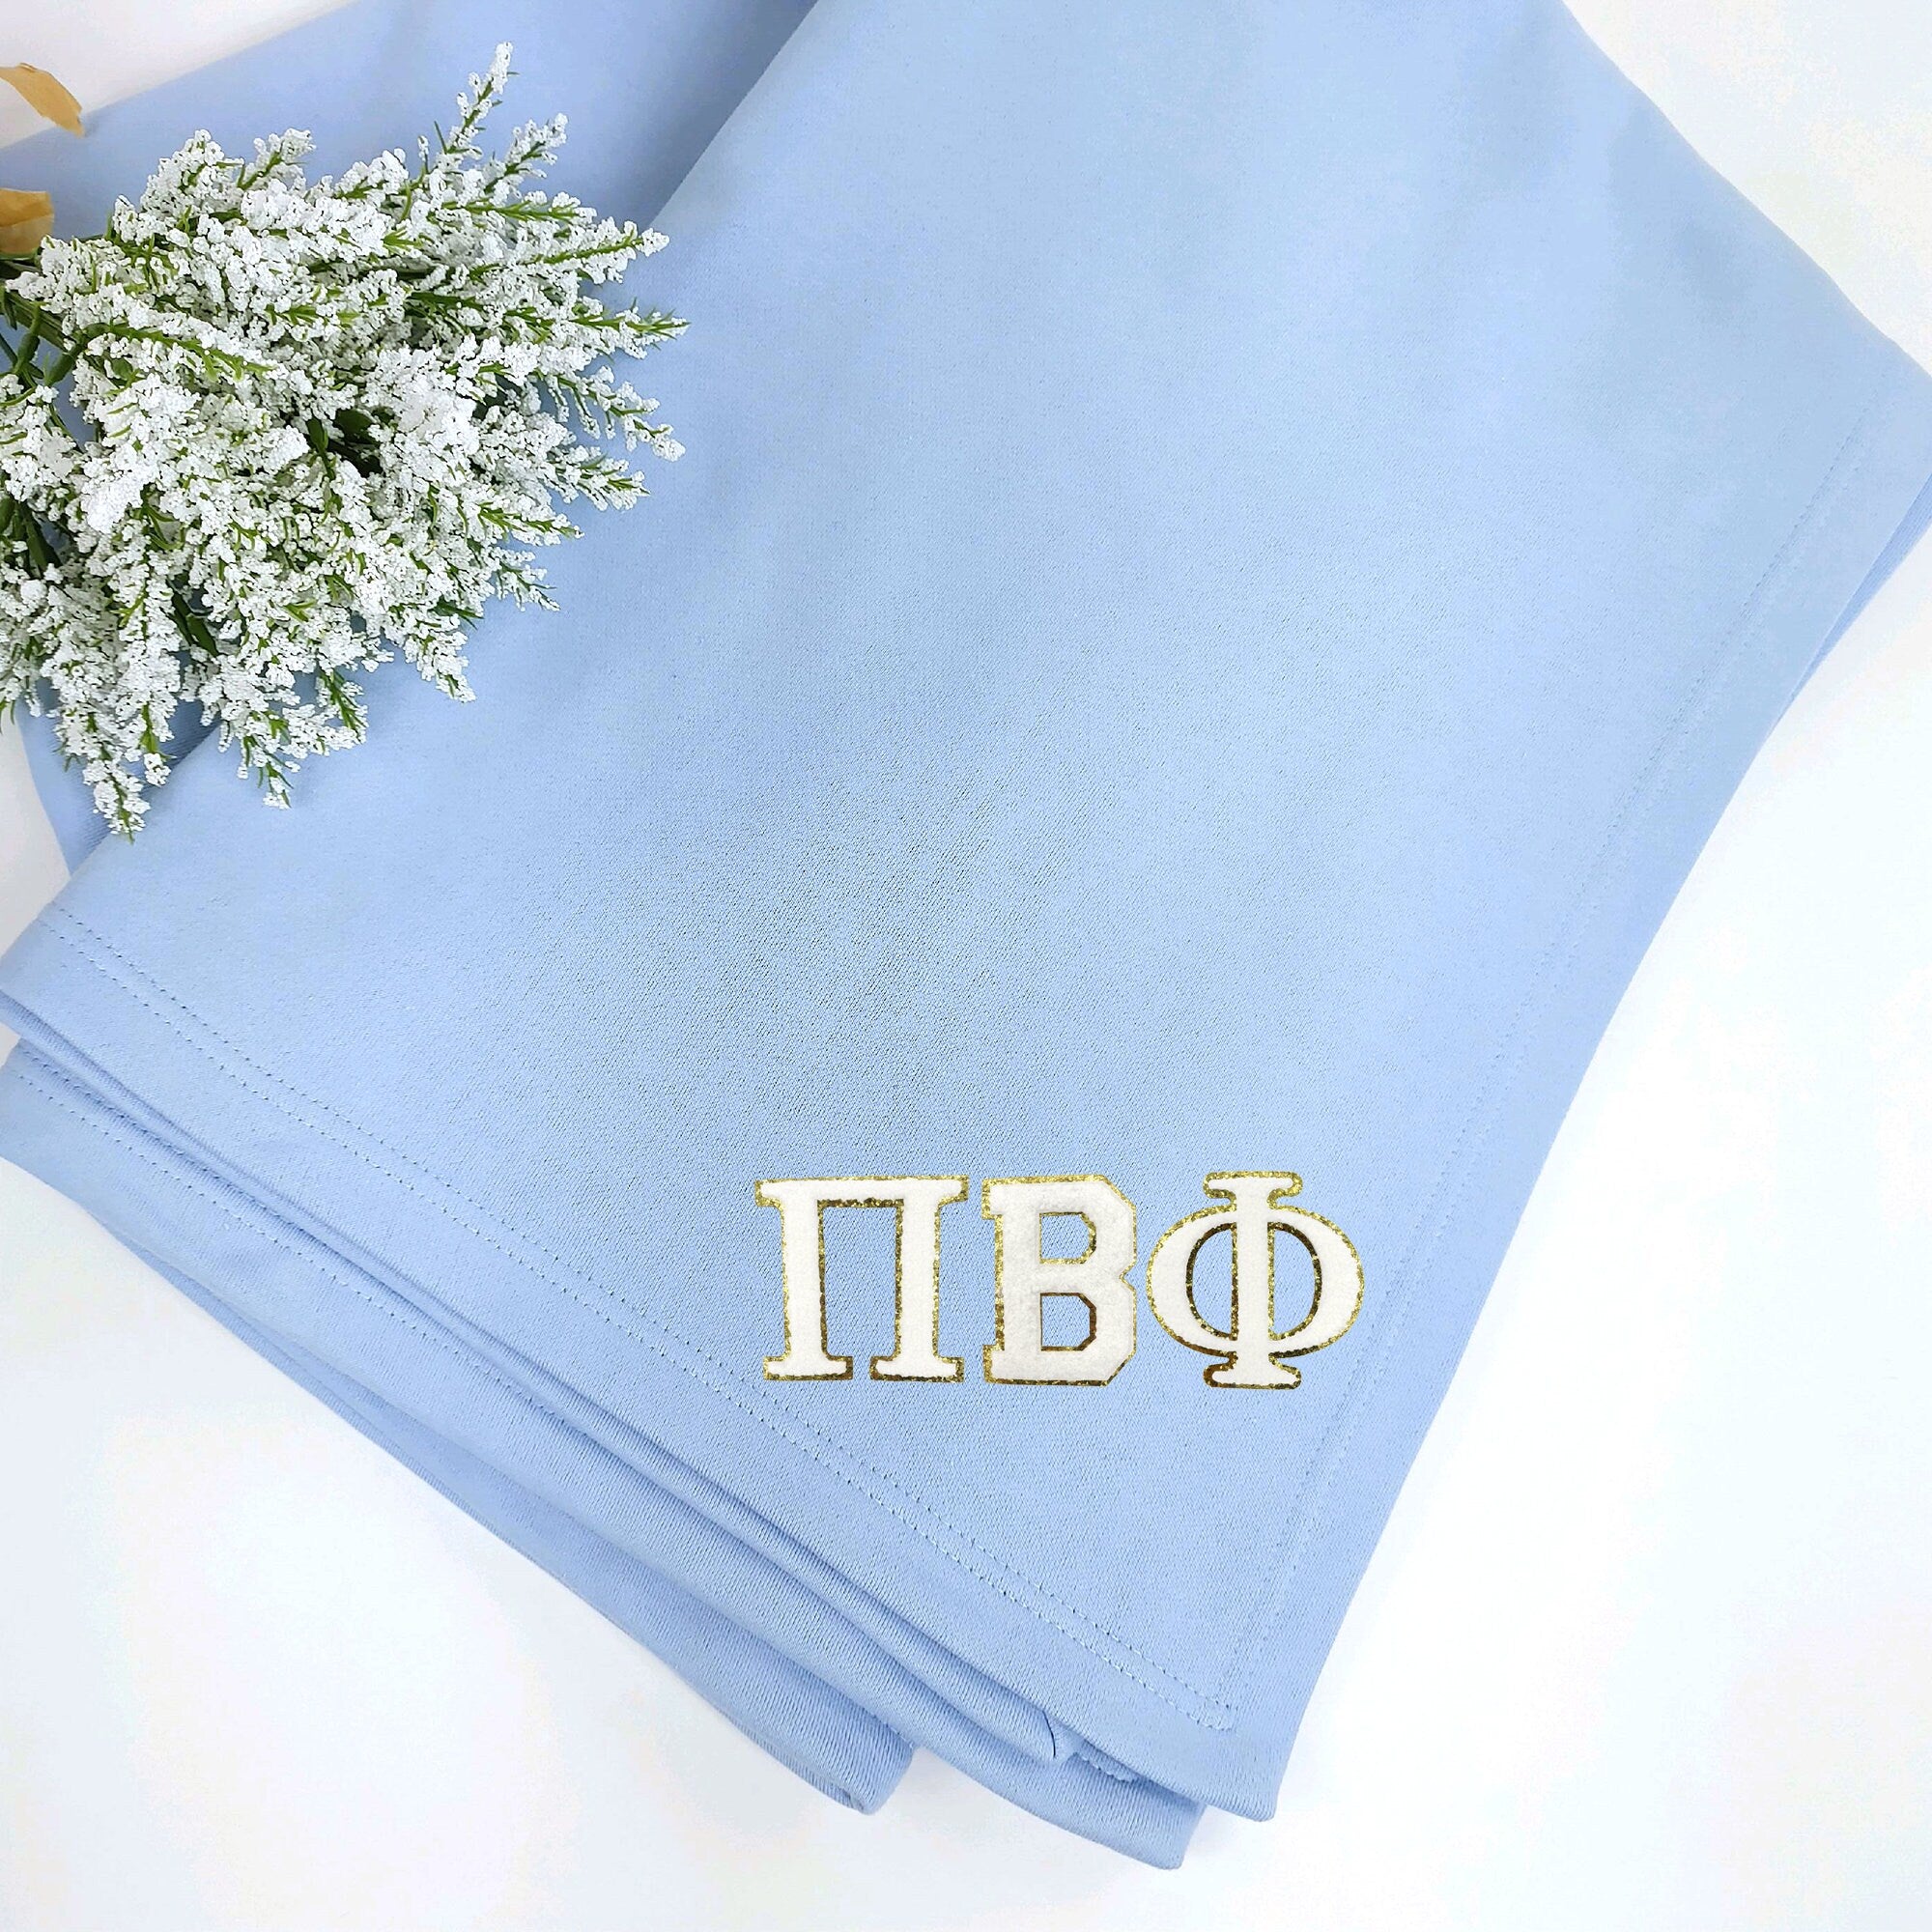 Pi Beta Phi Sweatshirt Blanket with Chenille Patch, Sorority Chenille Patch, Warm and Soft